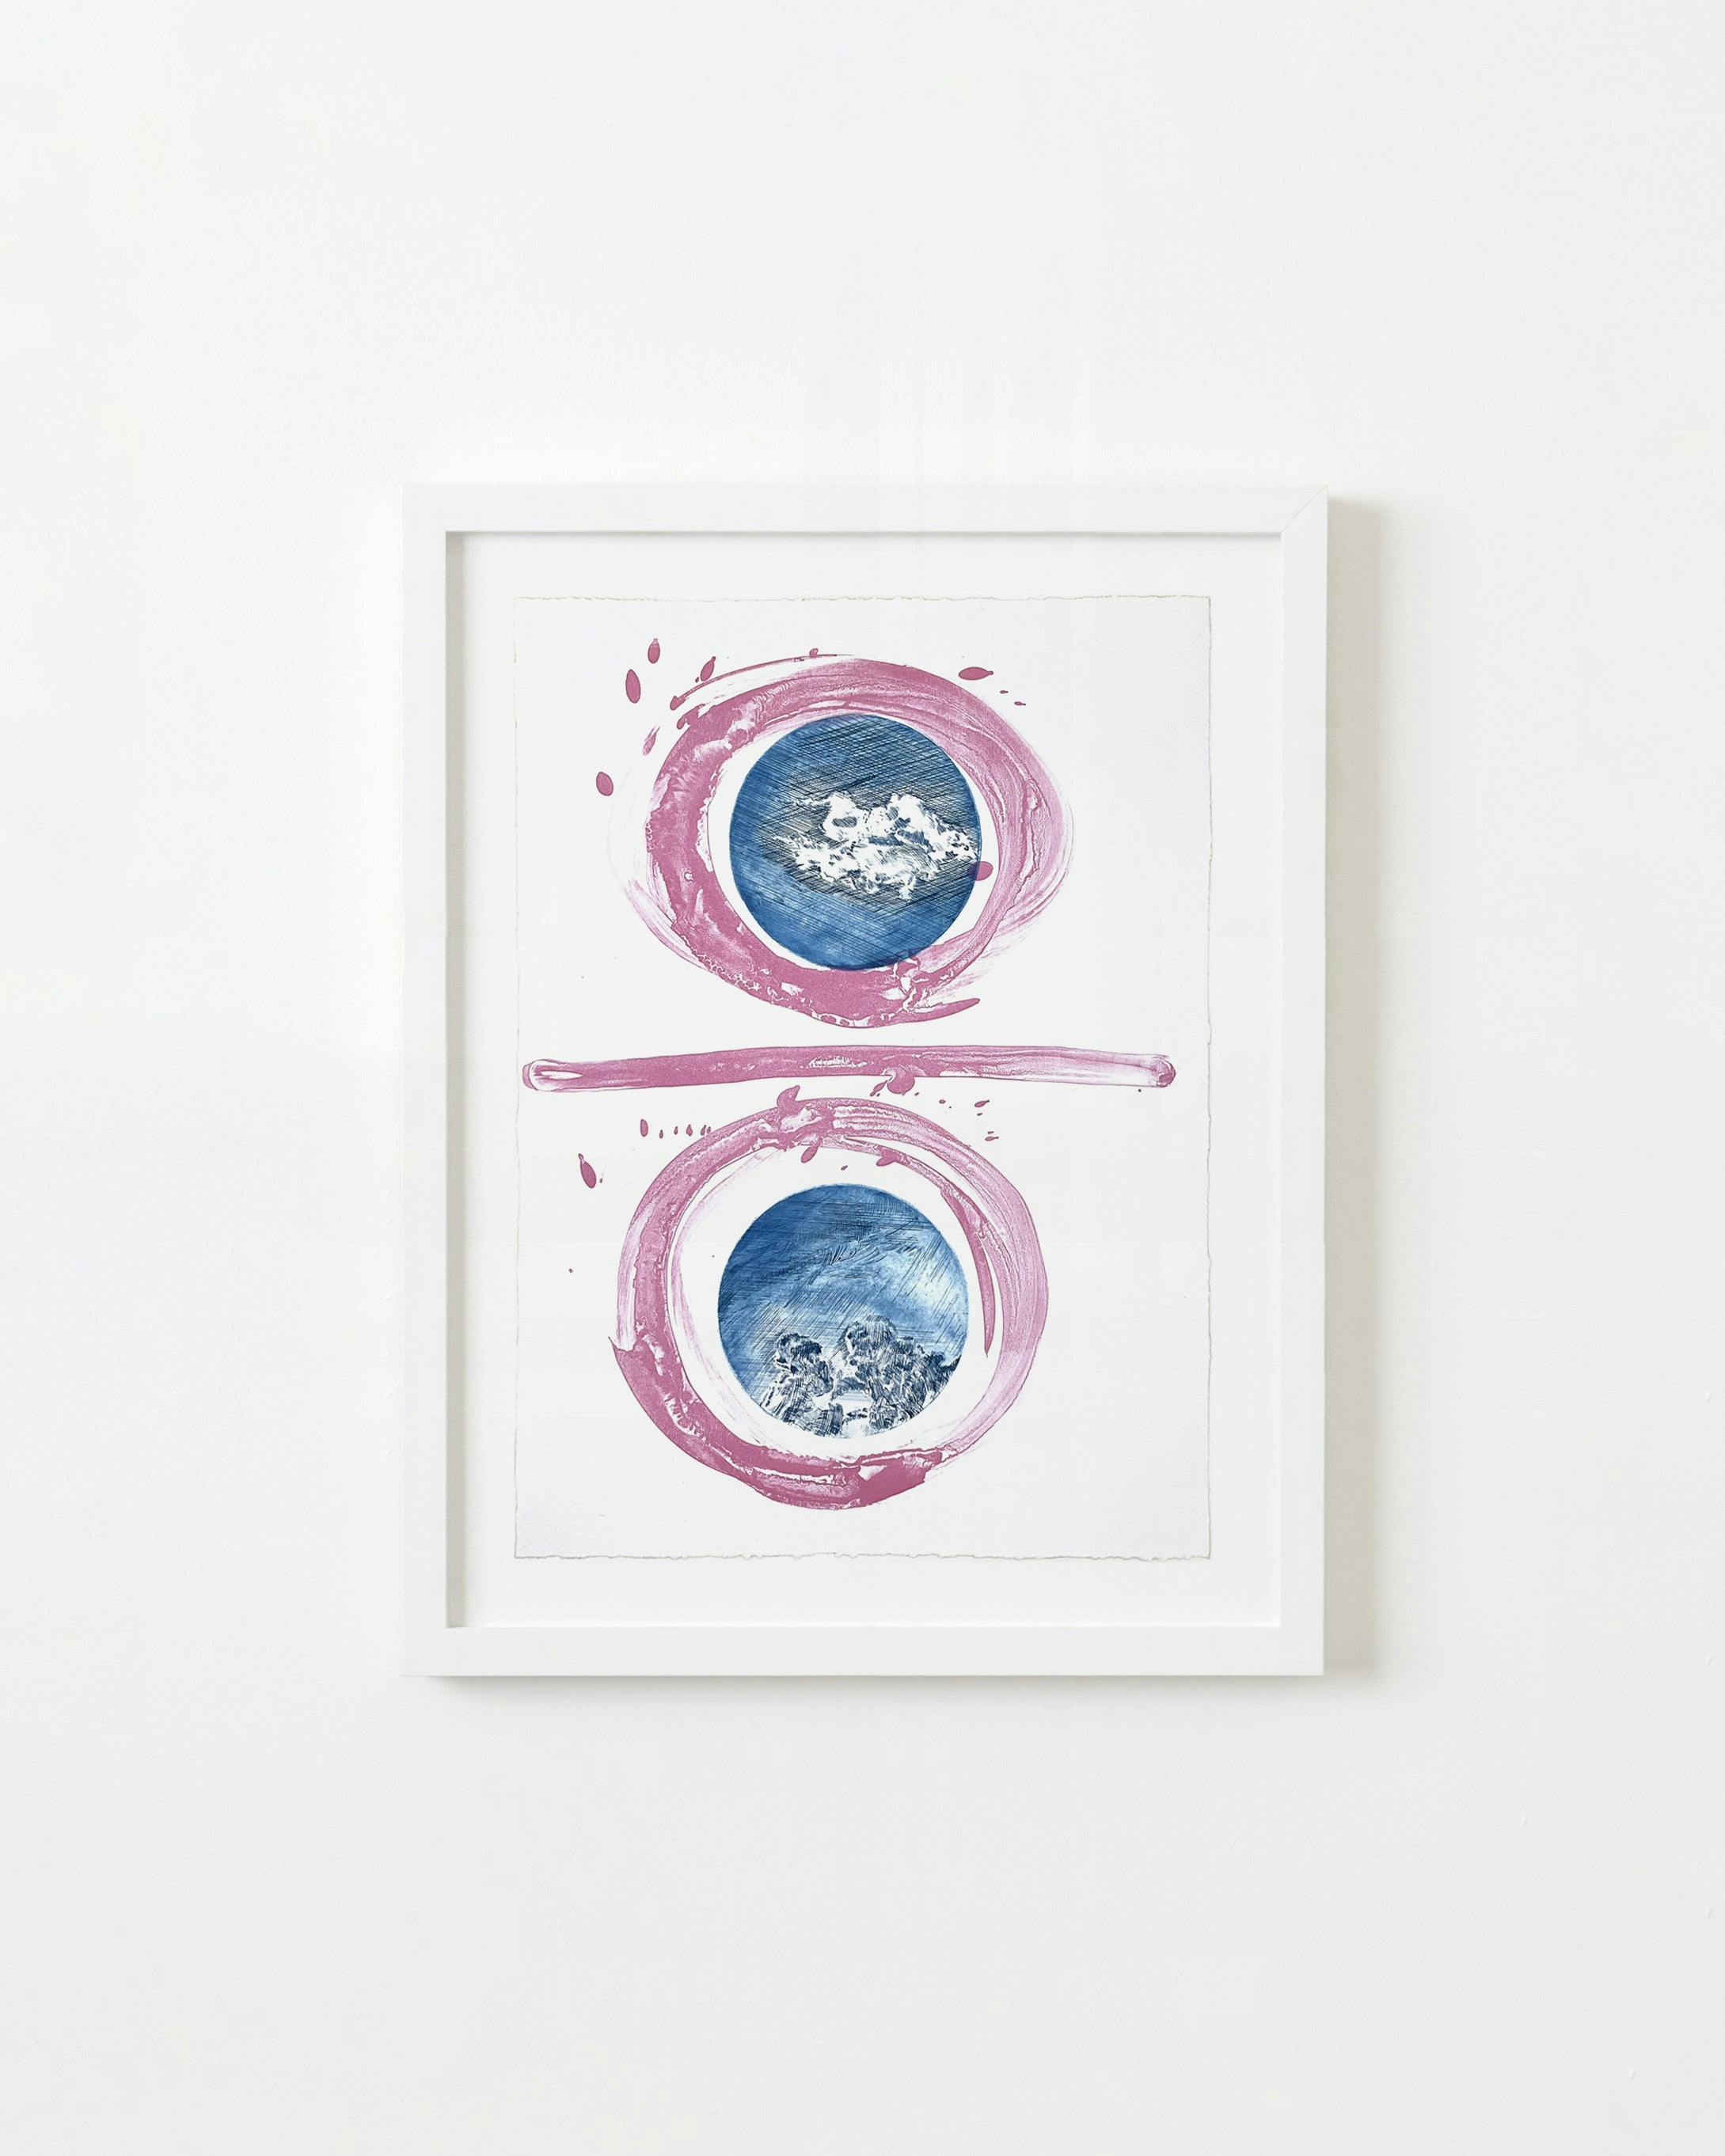 Print by Ruben Castillo titled "Your Cloud, My Cloud".